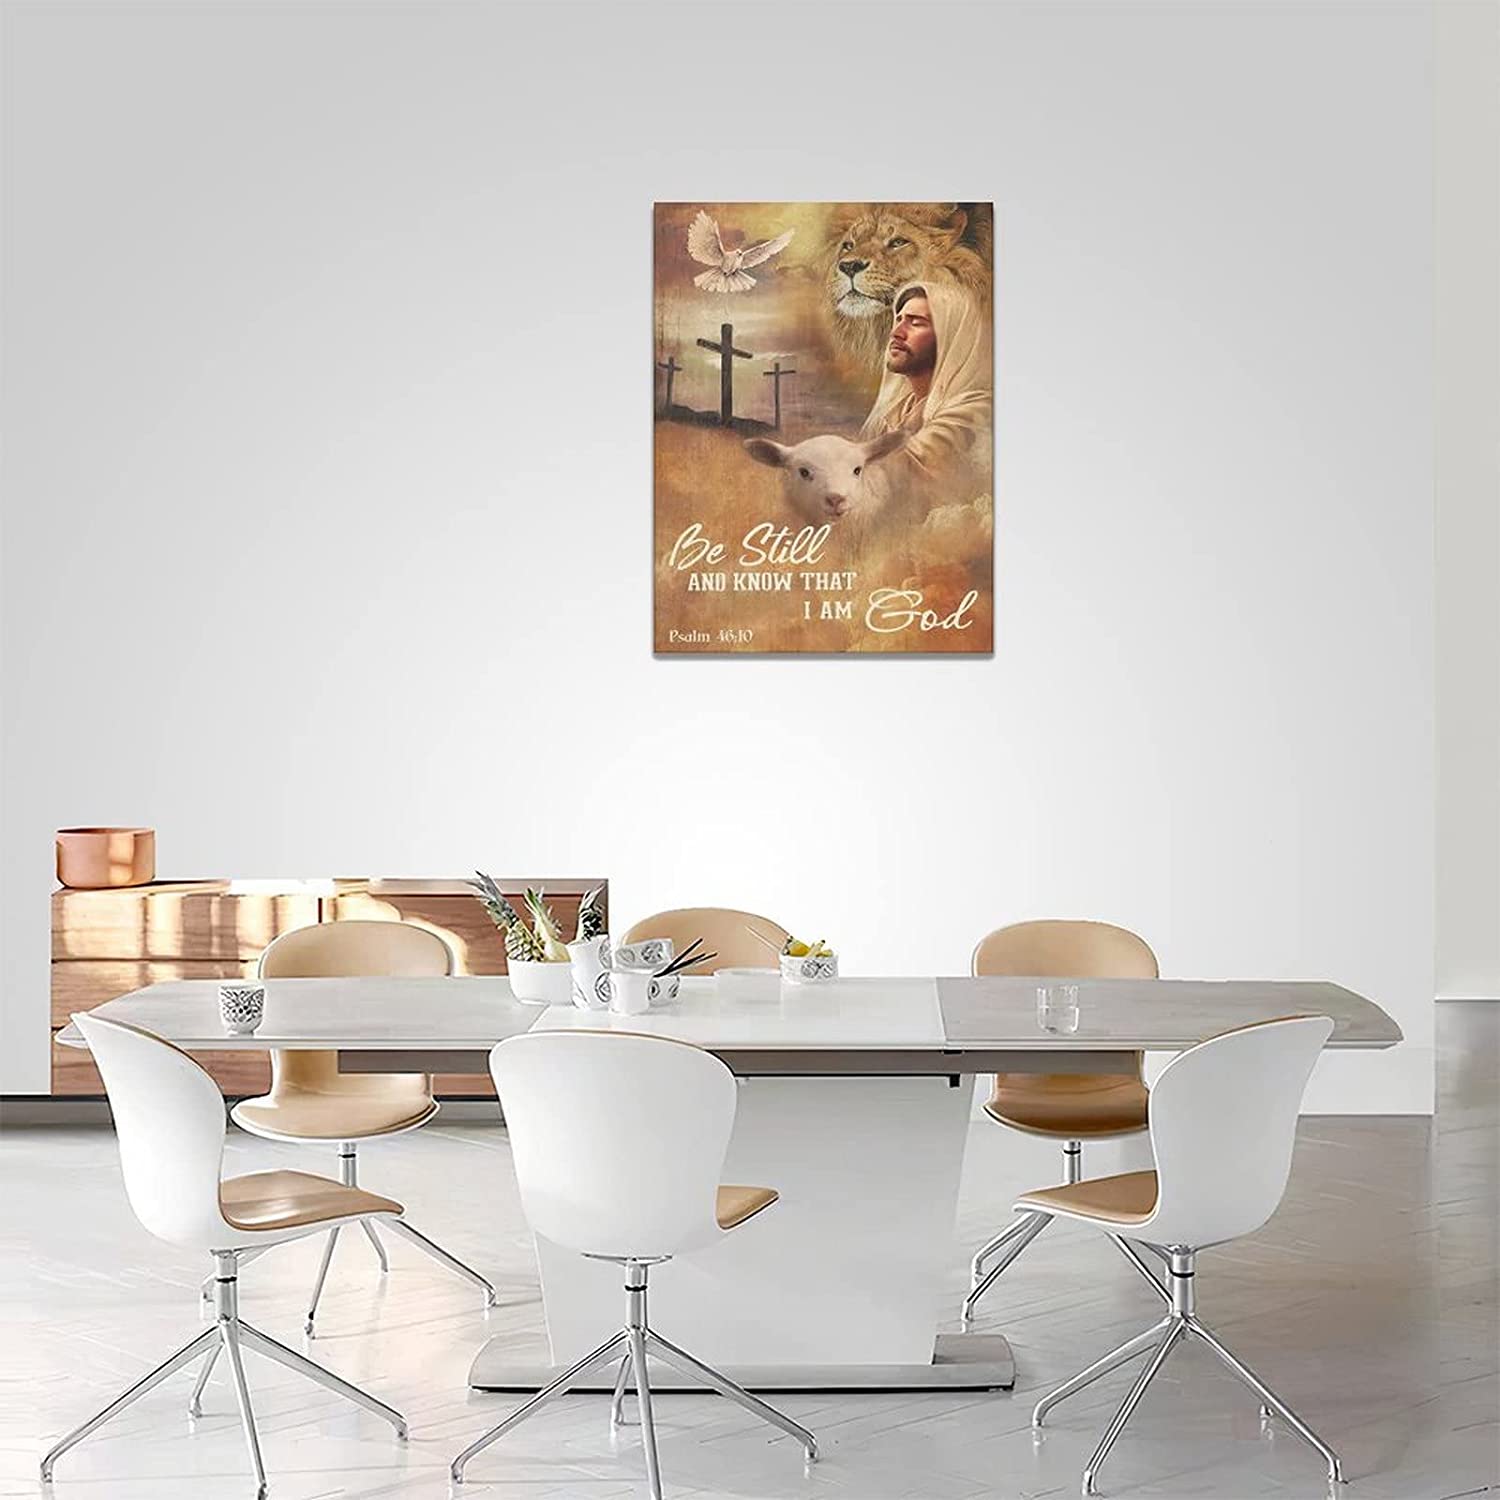 Jesus and Lion Canvas Wall Art Lion of Judah Wall Decor Christian Lion Lamb  Dove Cross Jesus Pictures for Wall Prints Inspirational Painting Modern  Religious Home Artwork Decor 12"x16"